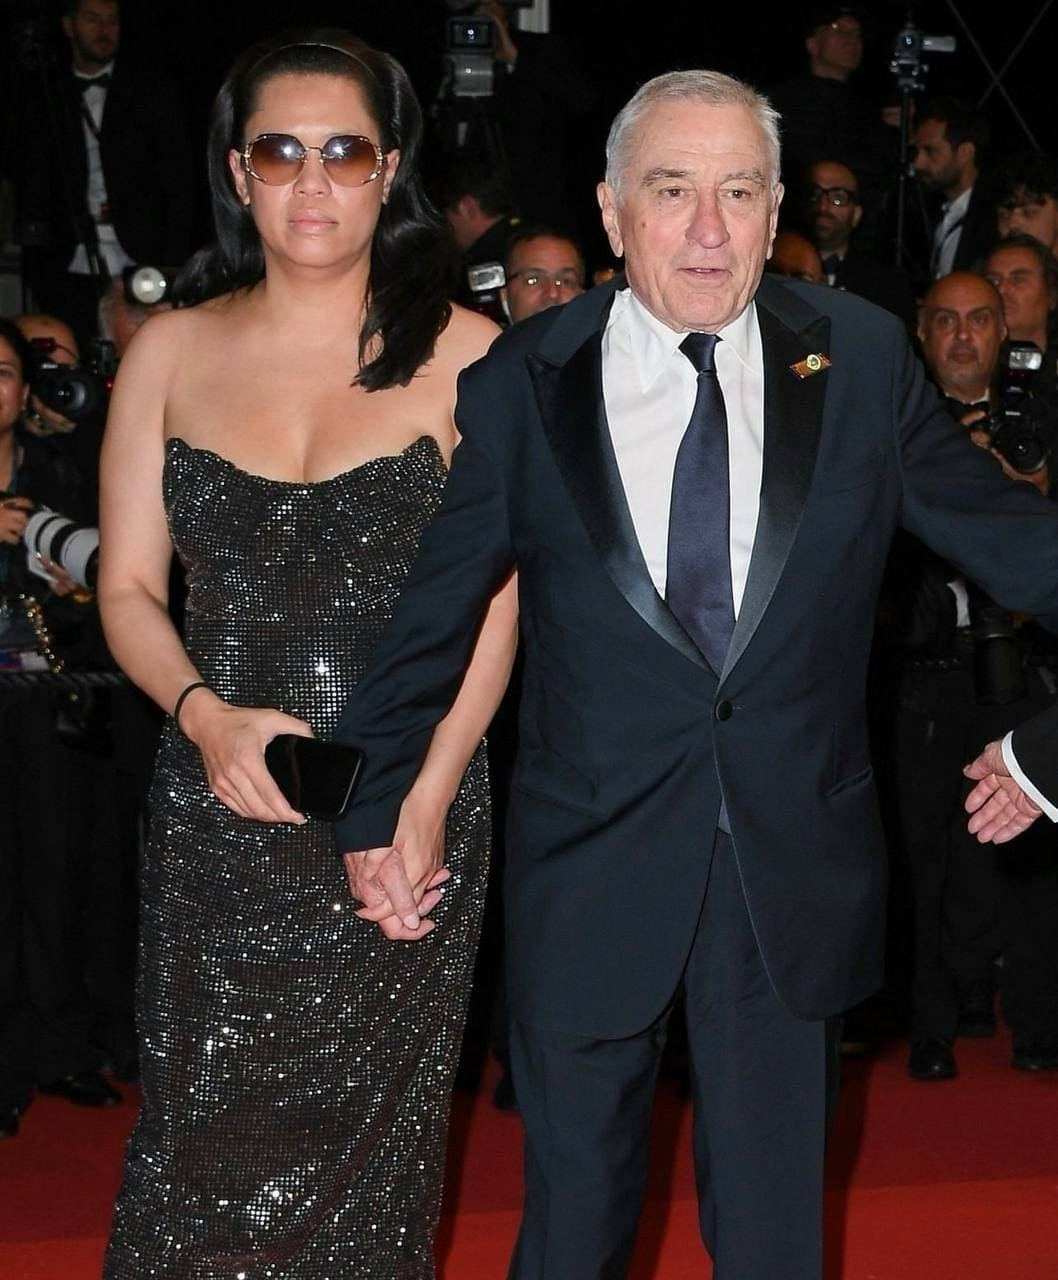 Like granddaughter with grandpa! Paparazzi could capture Robert De Niro’s young wife with their newborn